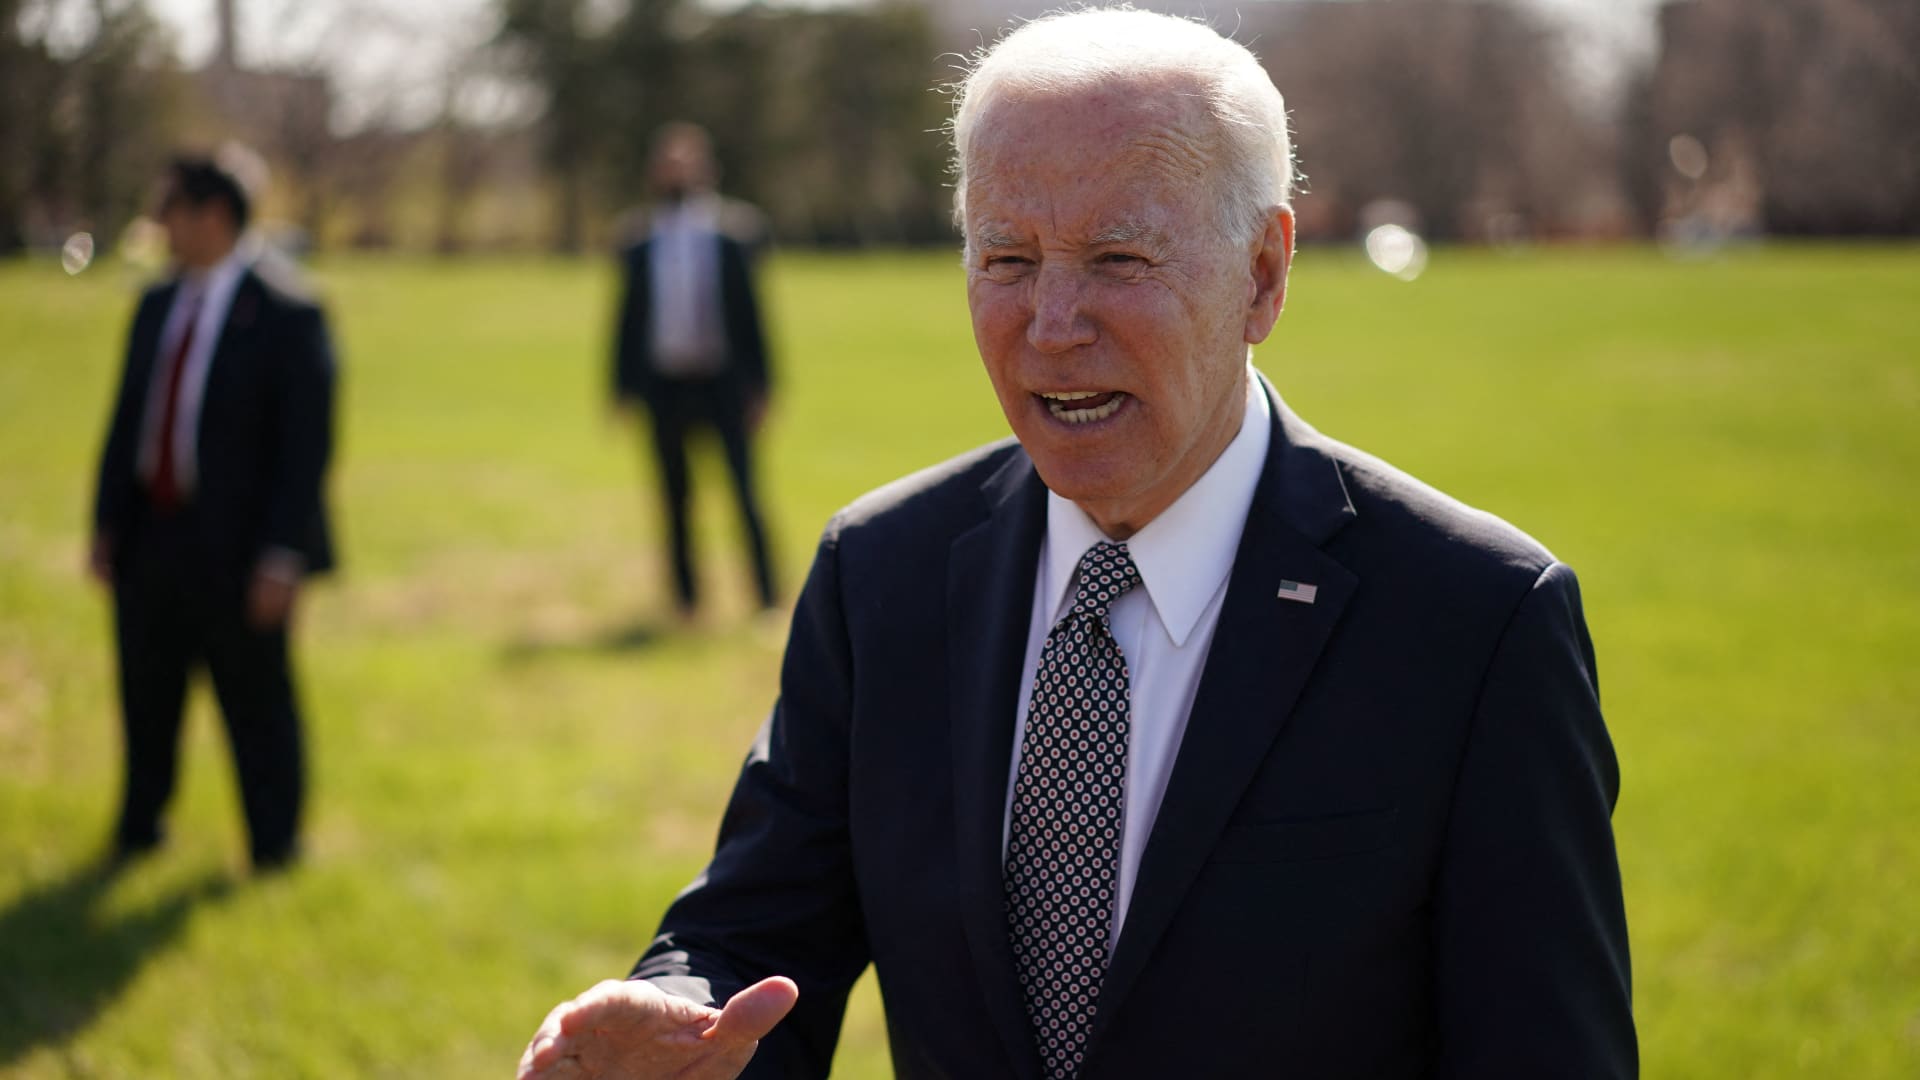 US President Joe Biden speaks to reporters upon arrival at Fort McNair in Washington, DC on April 4, 2022.